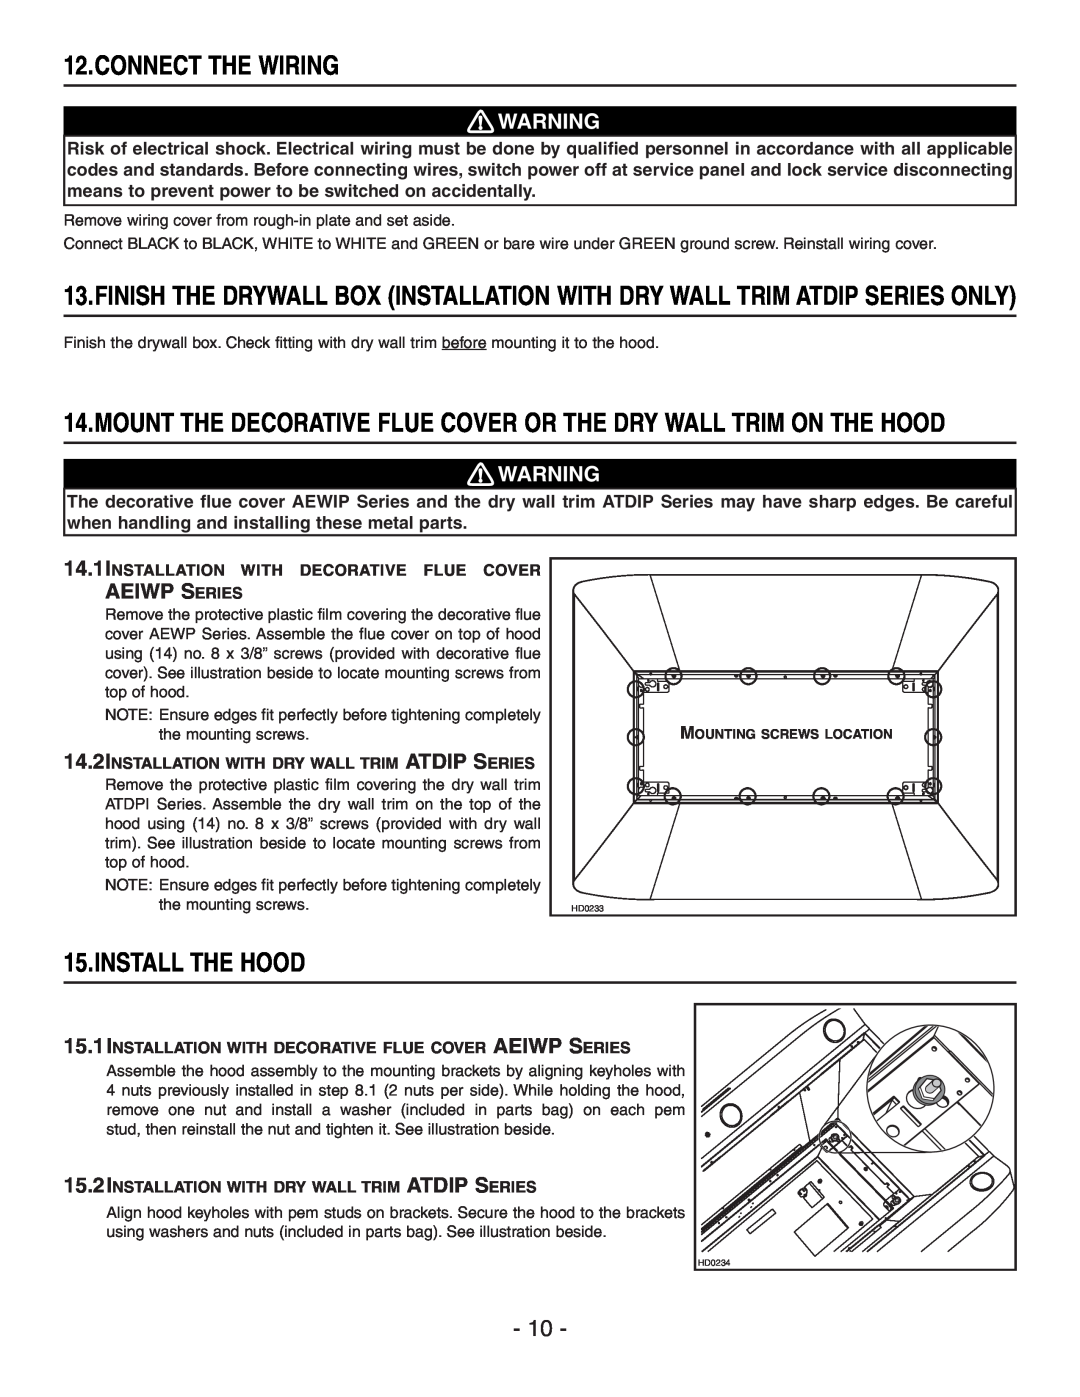 Best IP29M Series installation instructions Connect The Wiring, Install The Hood, Aeiwp Series 